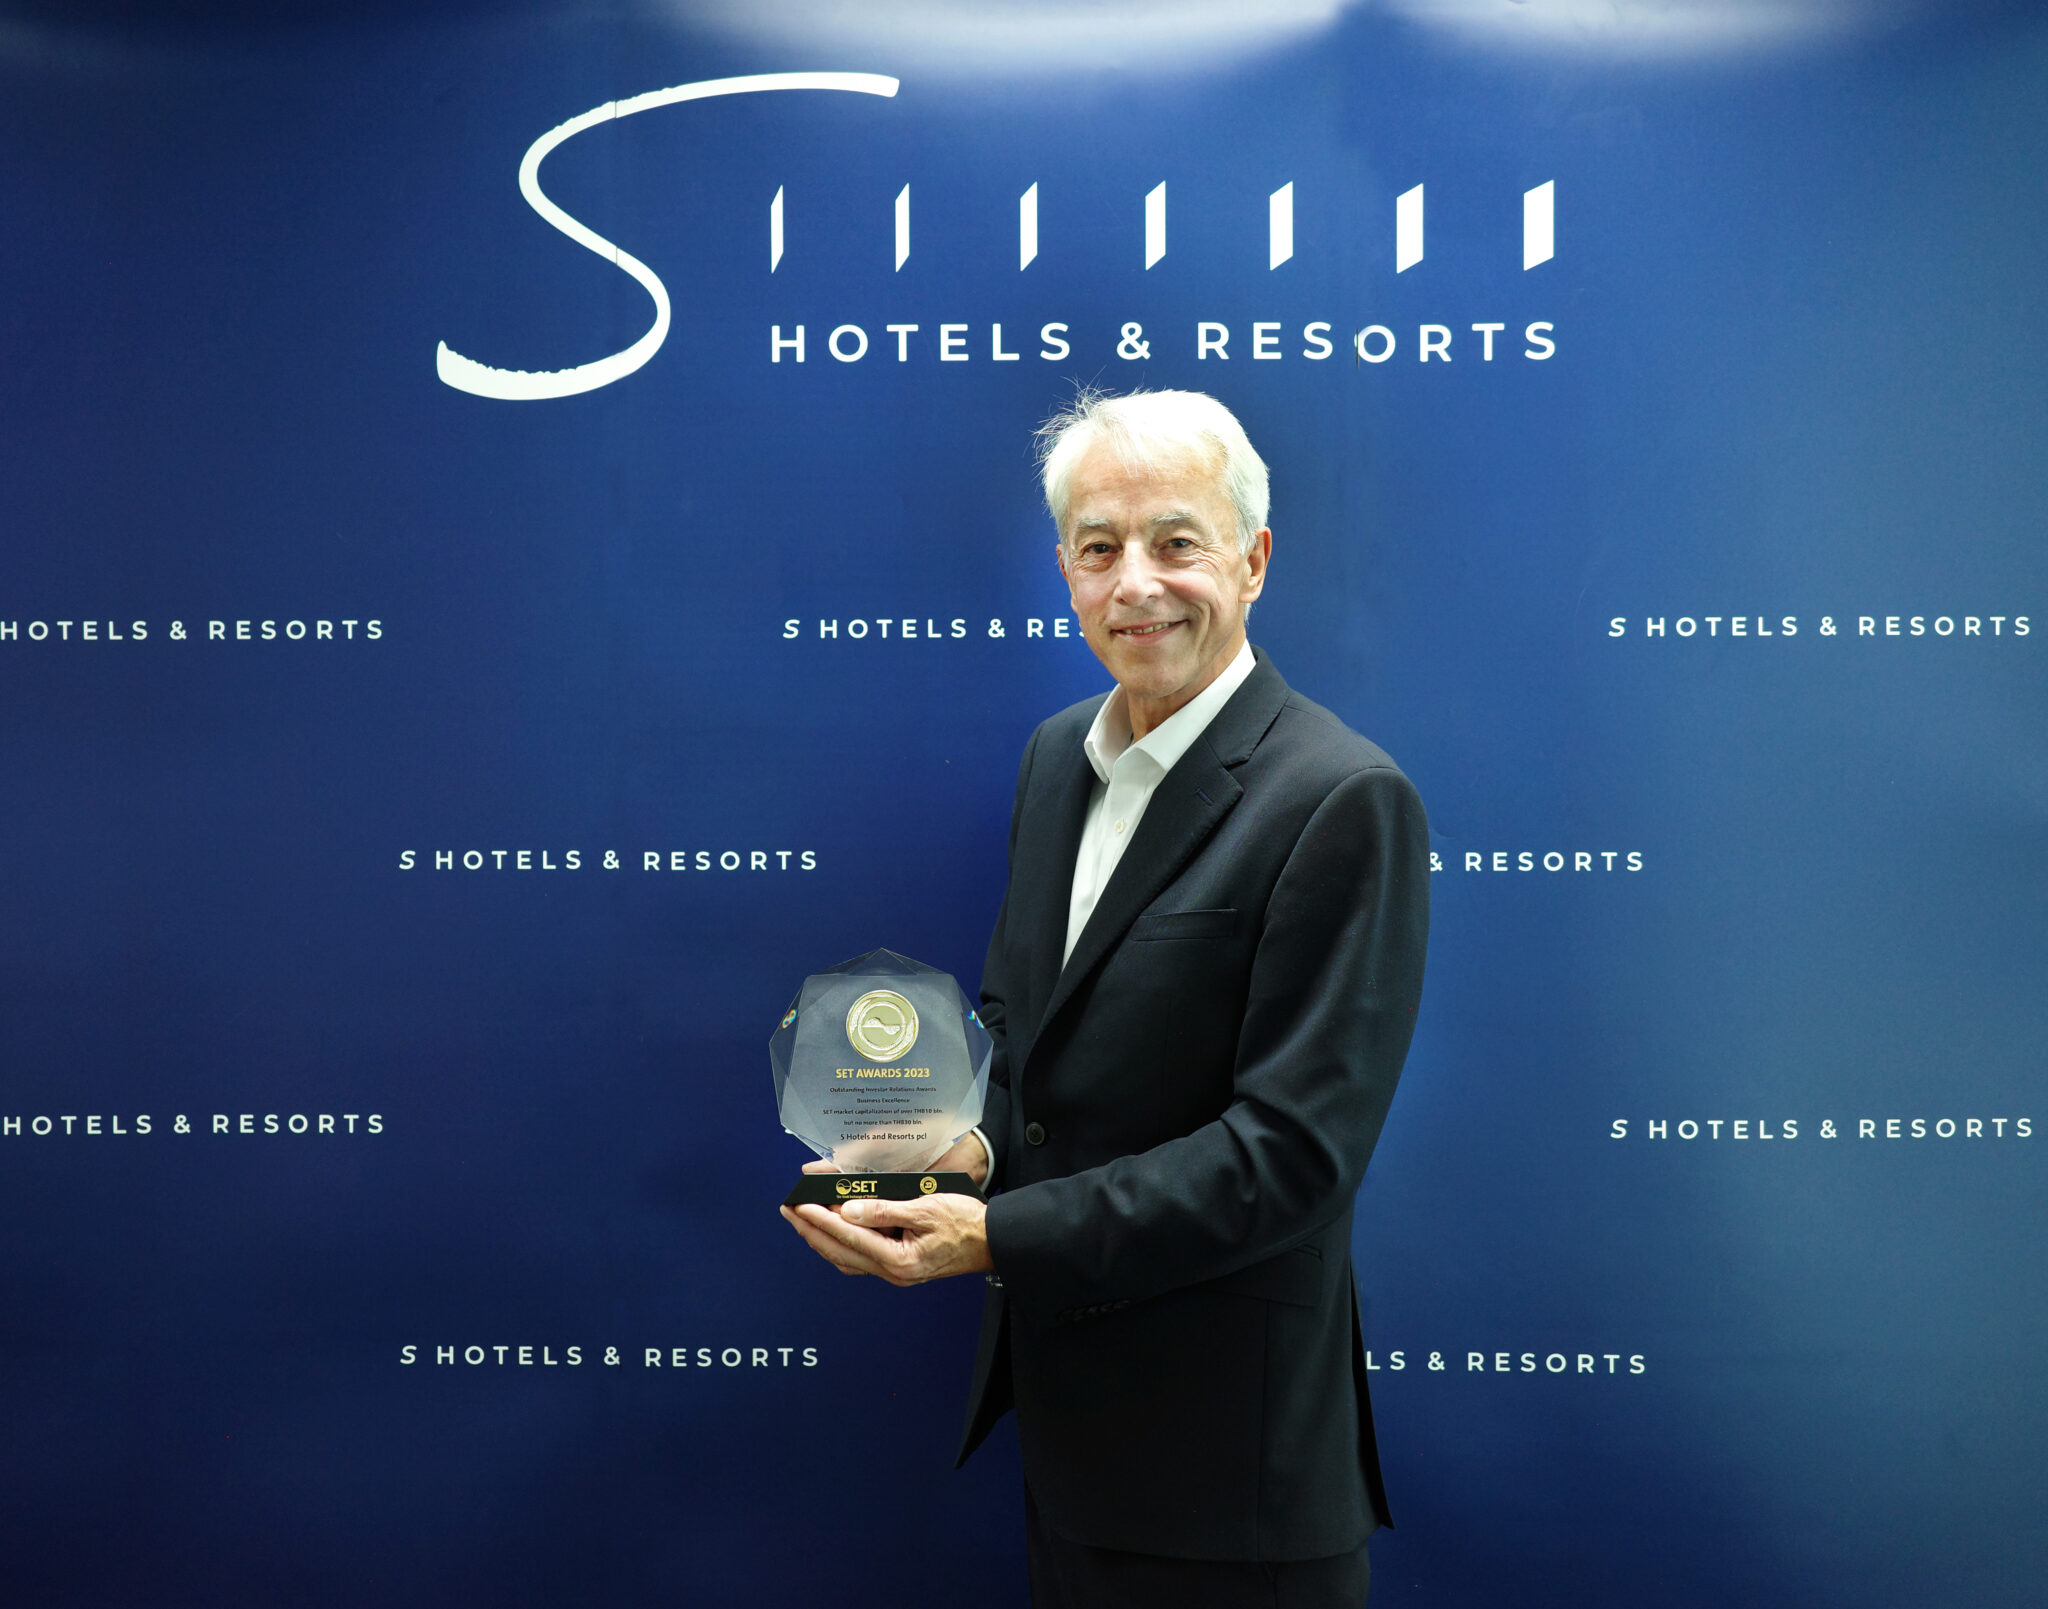 Mr. Michael Marshall, CEO, S Hotels & Resorts was presented with the “Outstanding Investor Relations Award 2023” from the Stock Exchange of Thailand (SET) and Money & Banking magazine